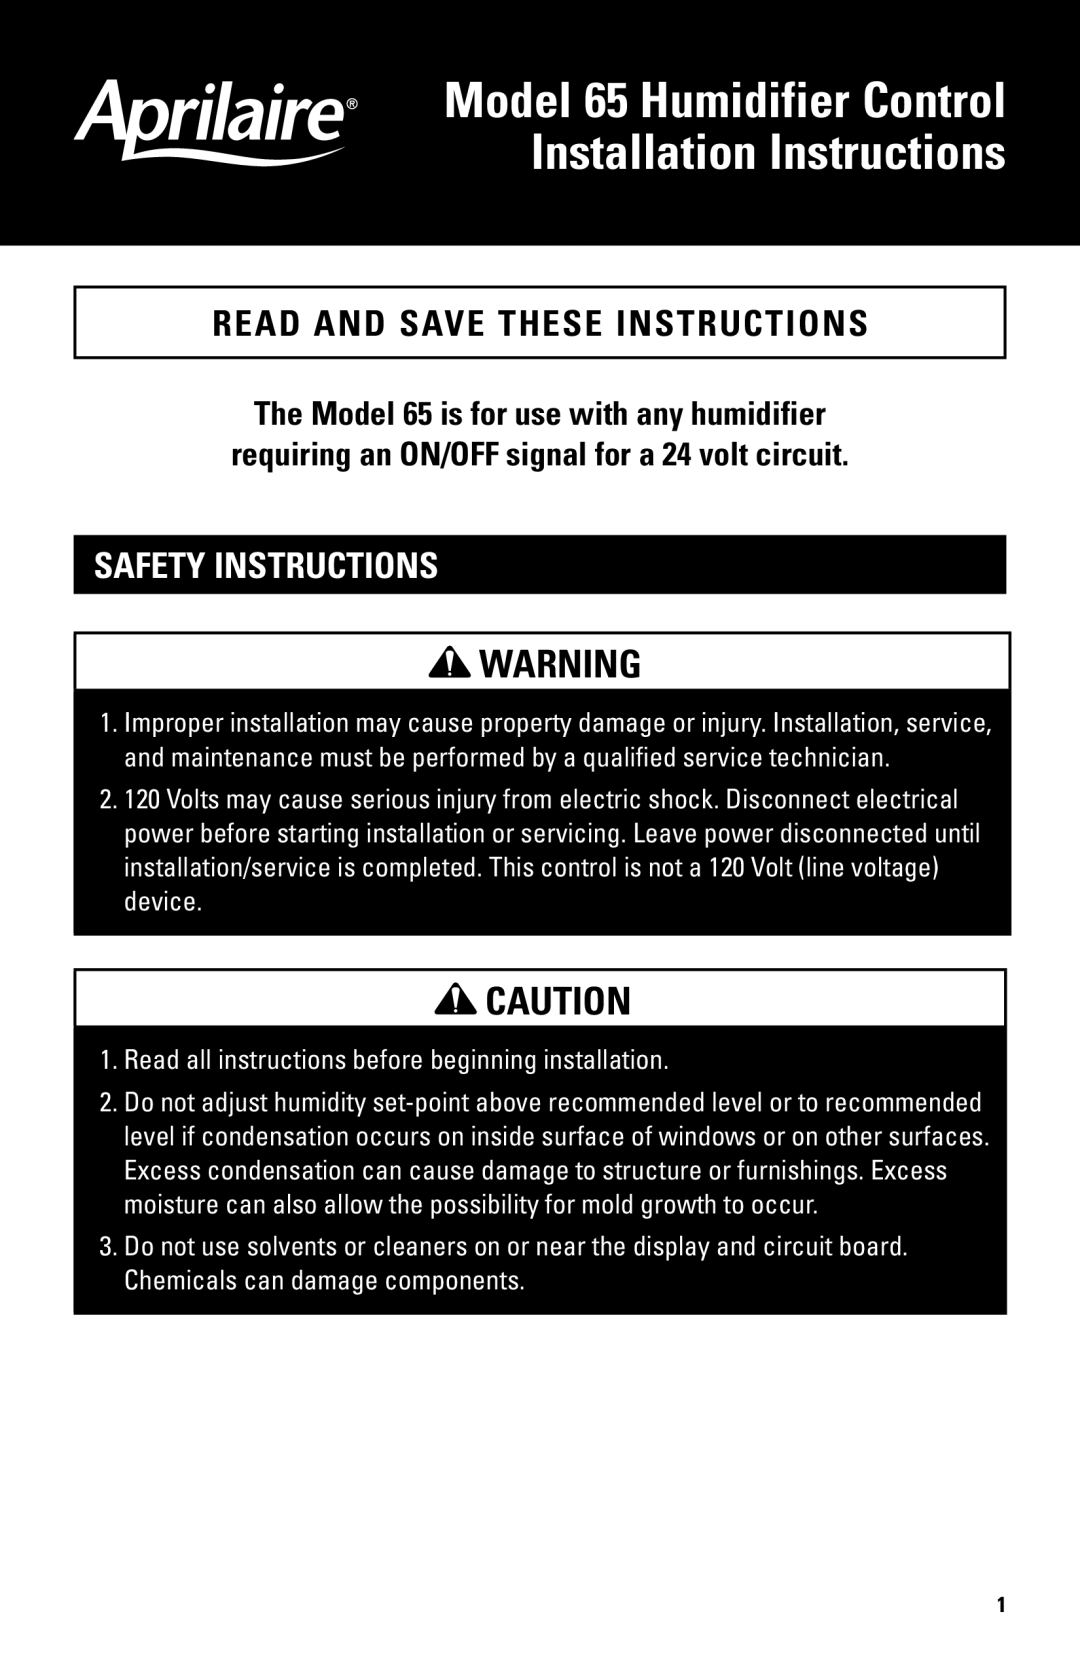 Aprilaire installation instructions Safety Instructions, Model 65 Humidifier Control, Installation Instructions 